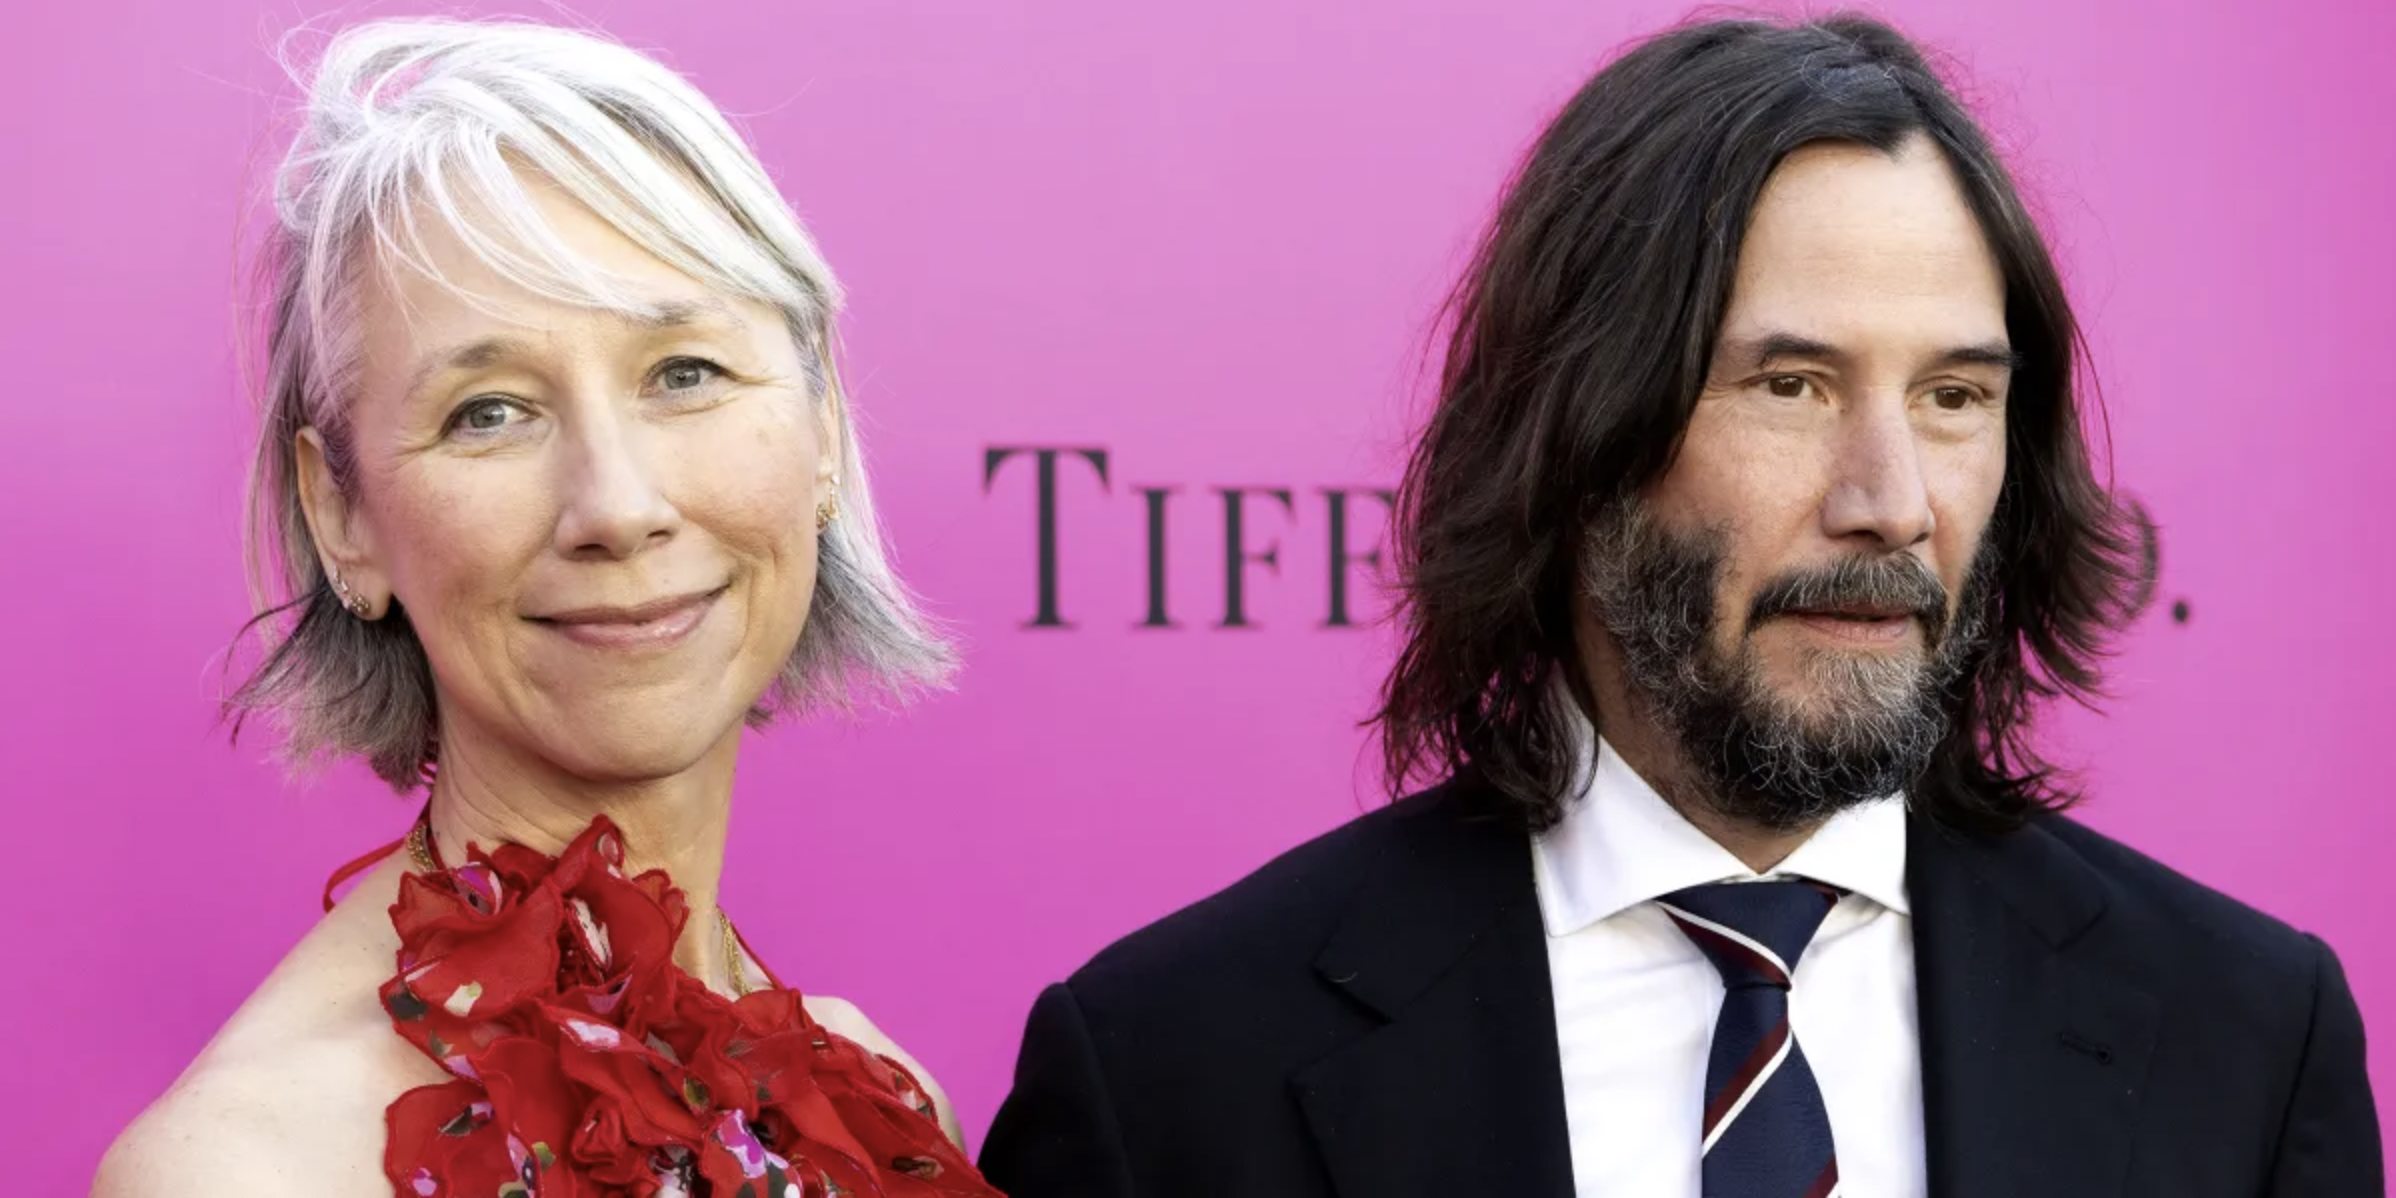 Alexandra Grant and Keanu Reeves | Source: Getty Images